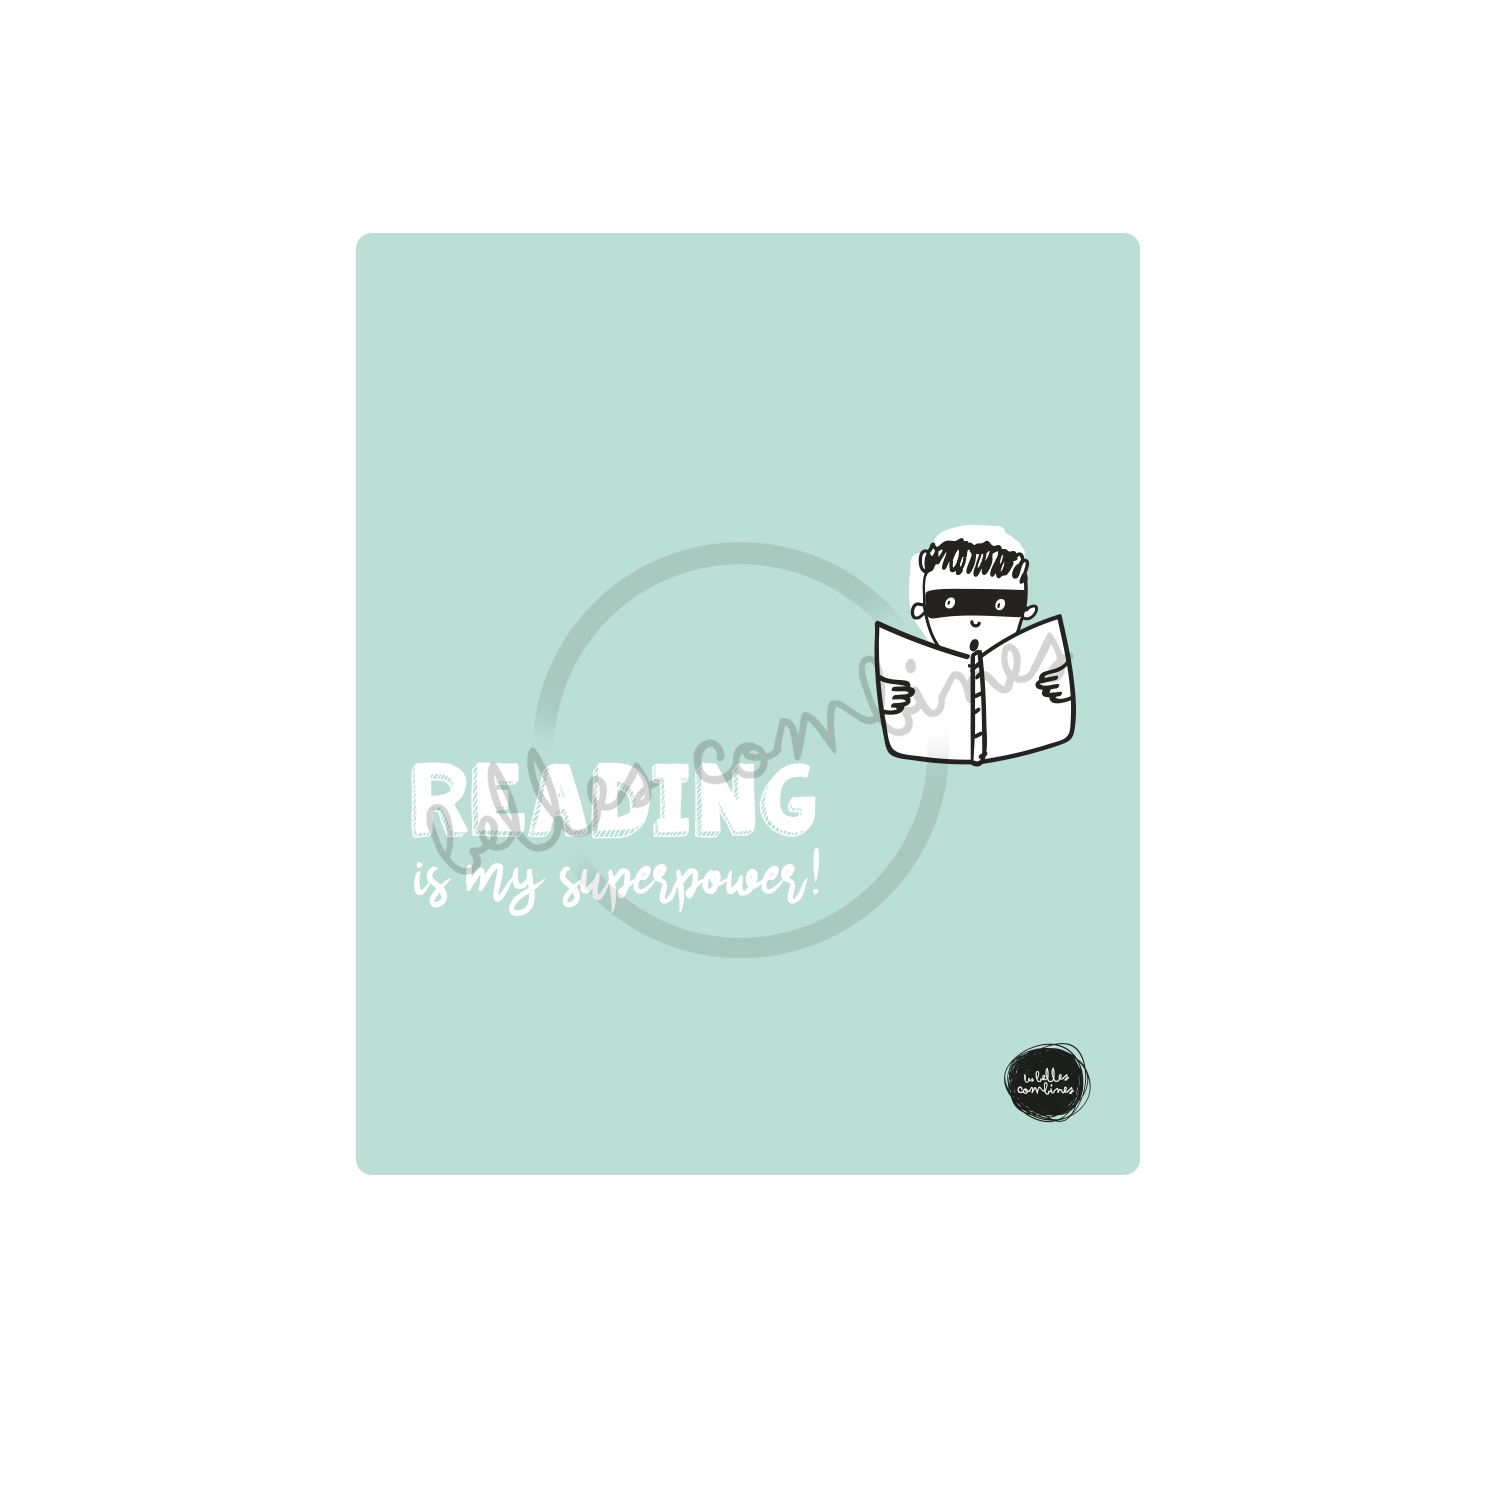 English version of the cover of Reading is my superpower book made by Les Belles Combines